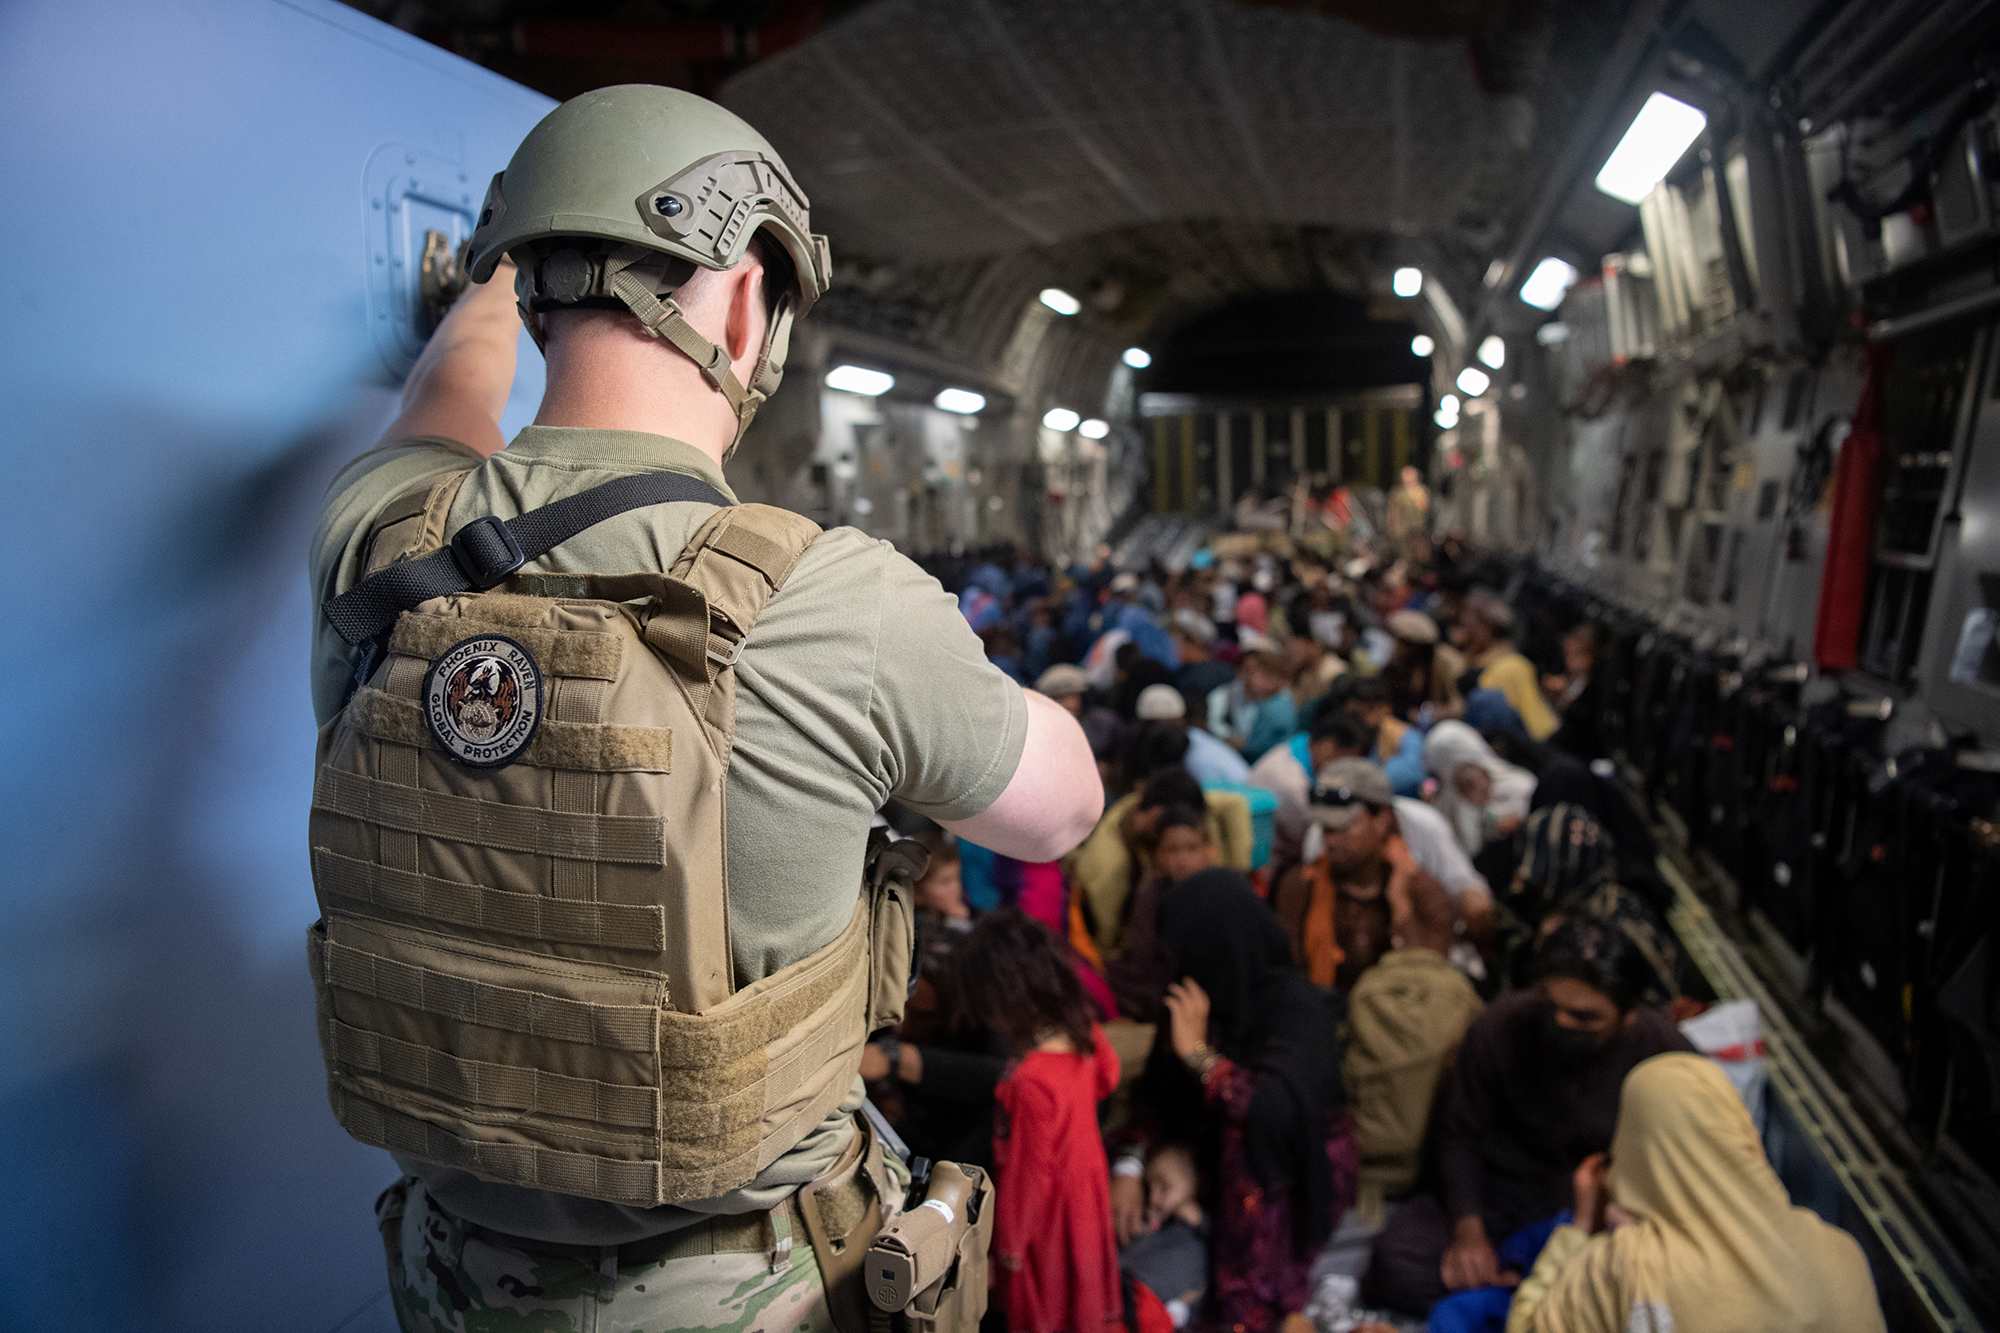 PHOTO: A U.S. Air Force security forces raven maintains security aboard a U.S. Air Force C-17 Globemaster III aircraft in support of the Afghanistan evacuation at Hamid Karzai International Airport in Kabul, Afghanistan, Aug. 24, 2021. 